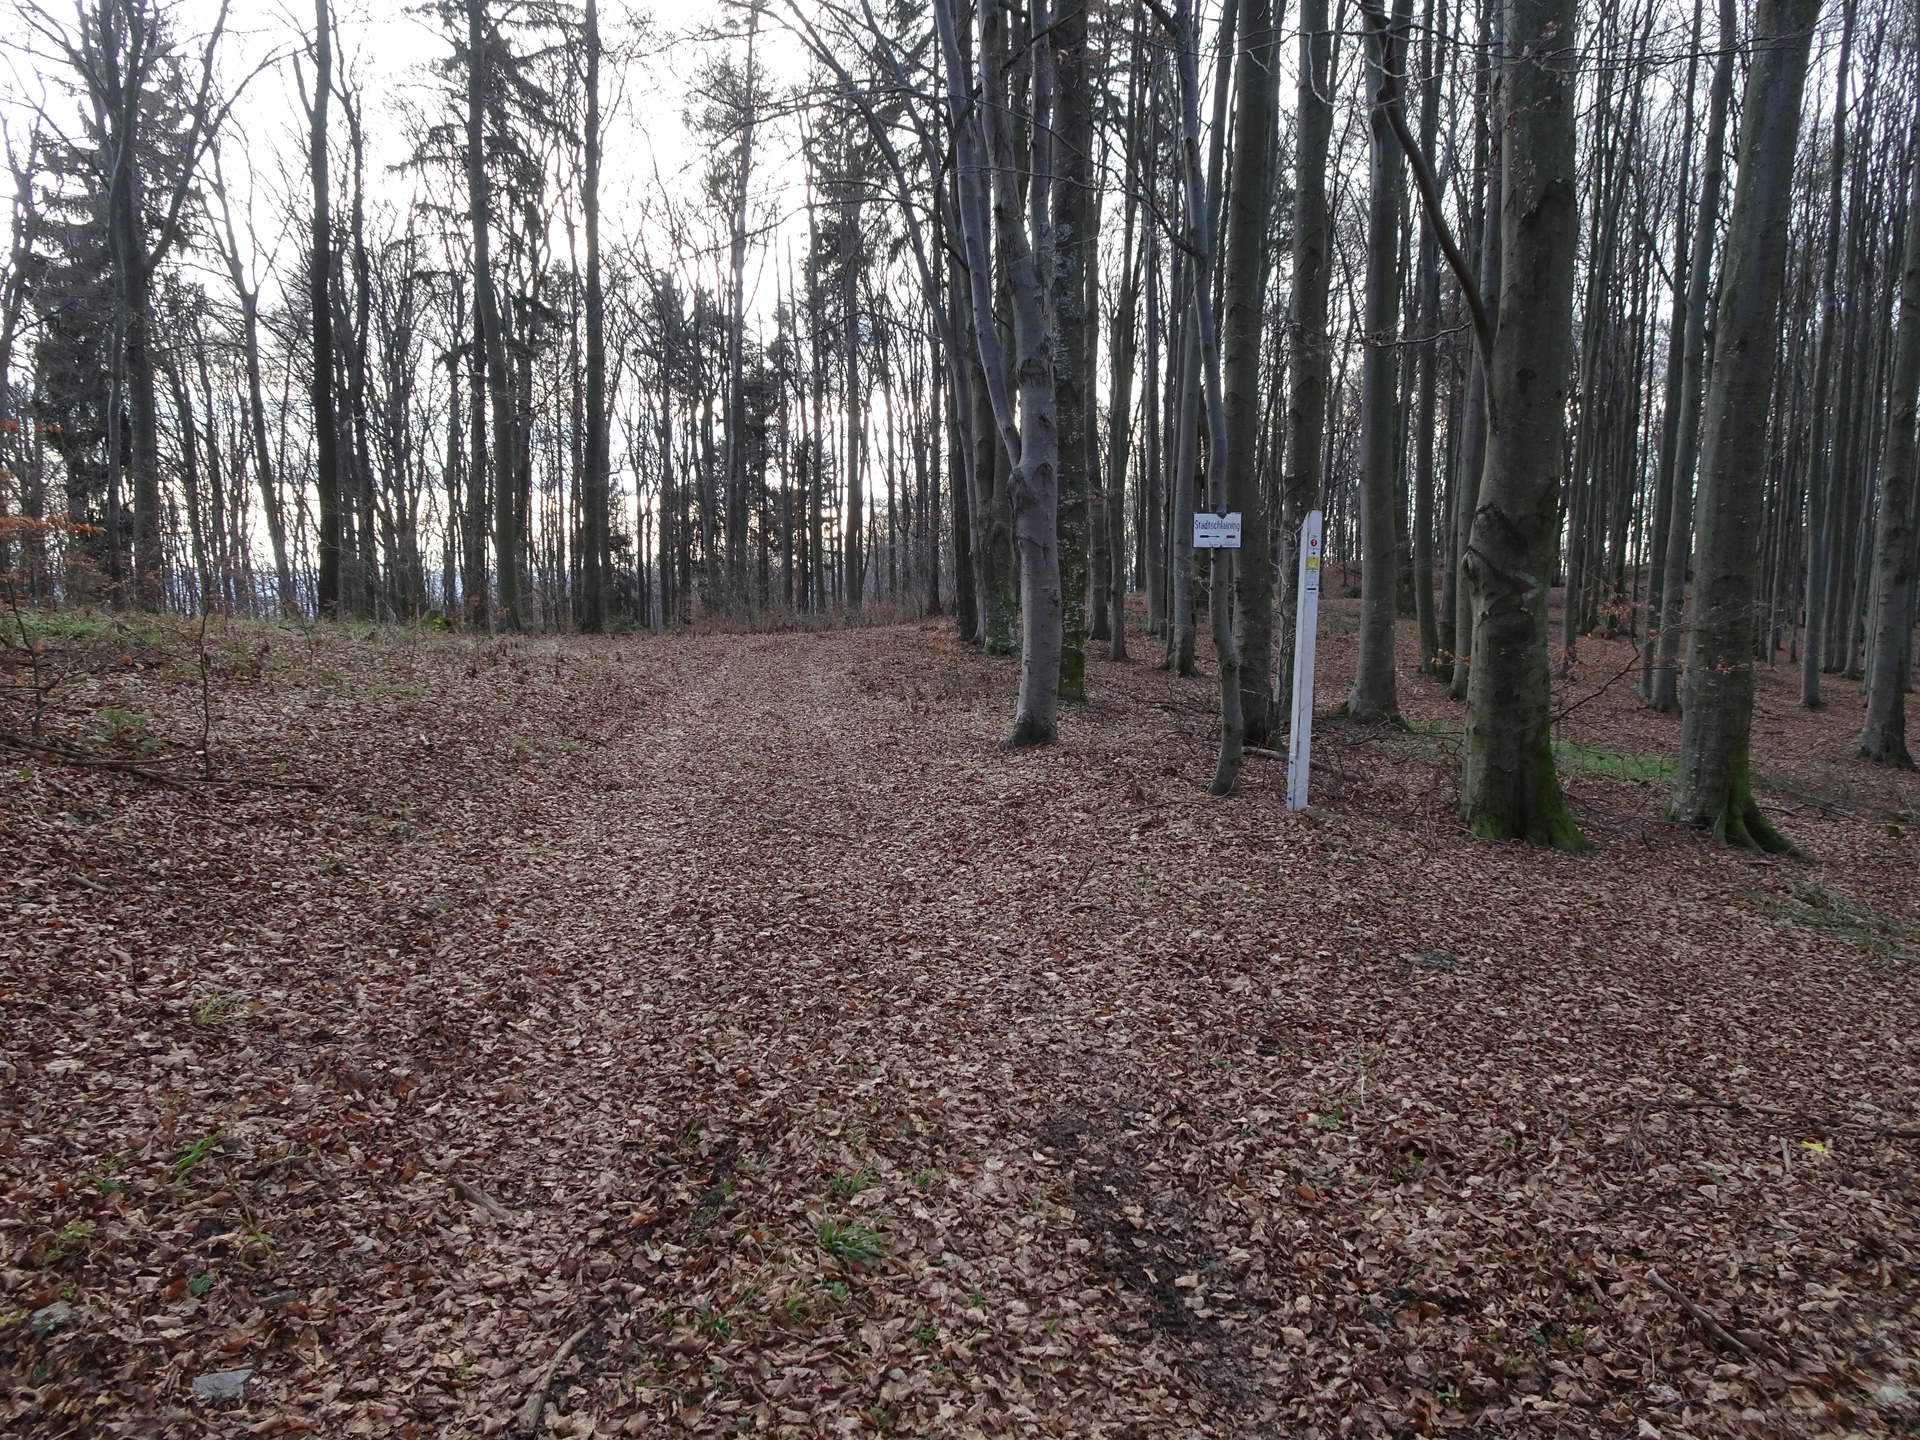 Keep straight and leave the marked trail here to access <i>Bremsberg</i>